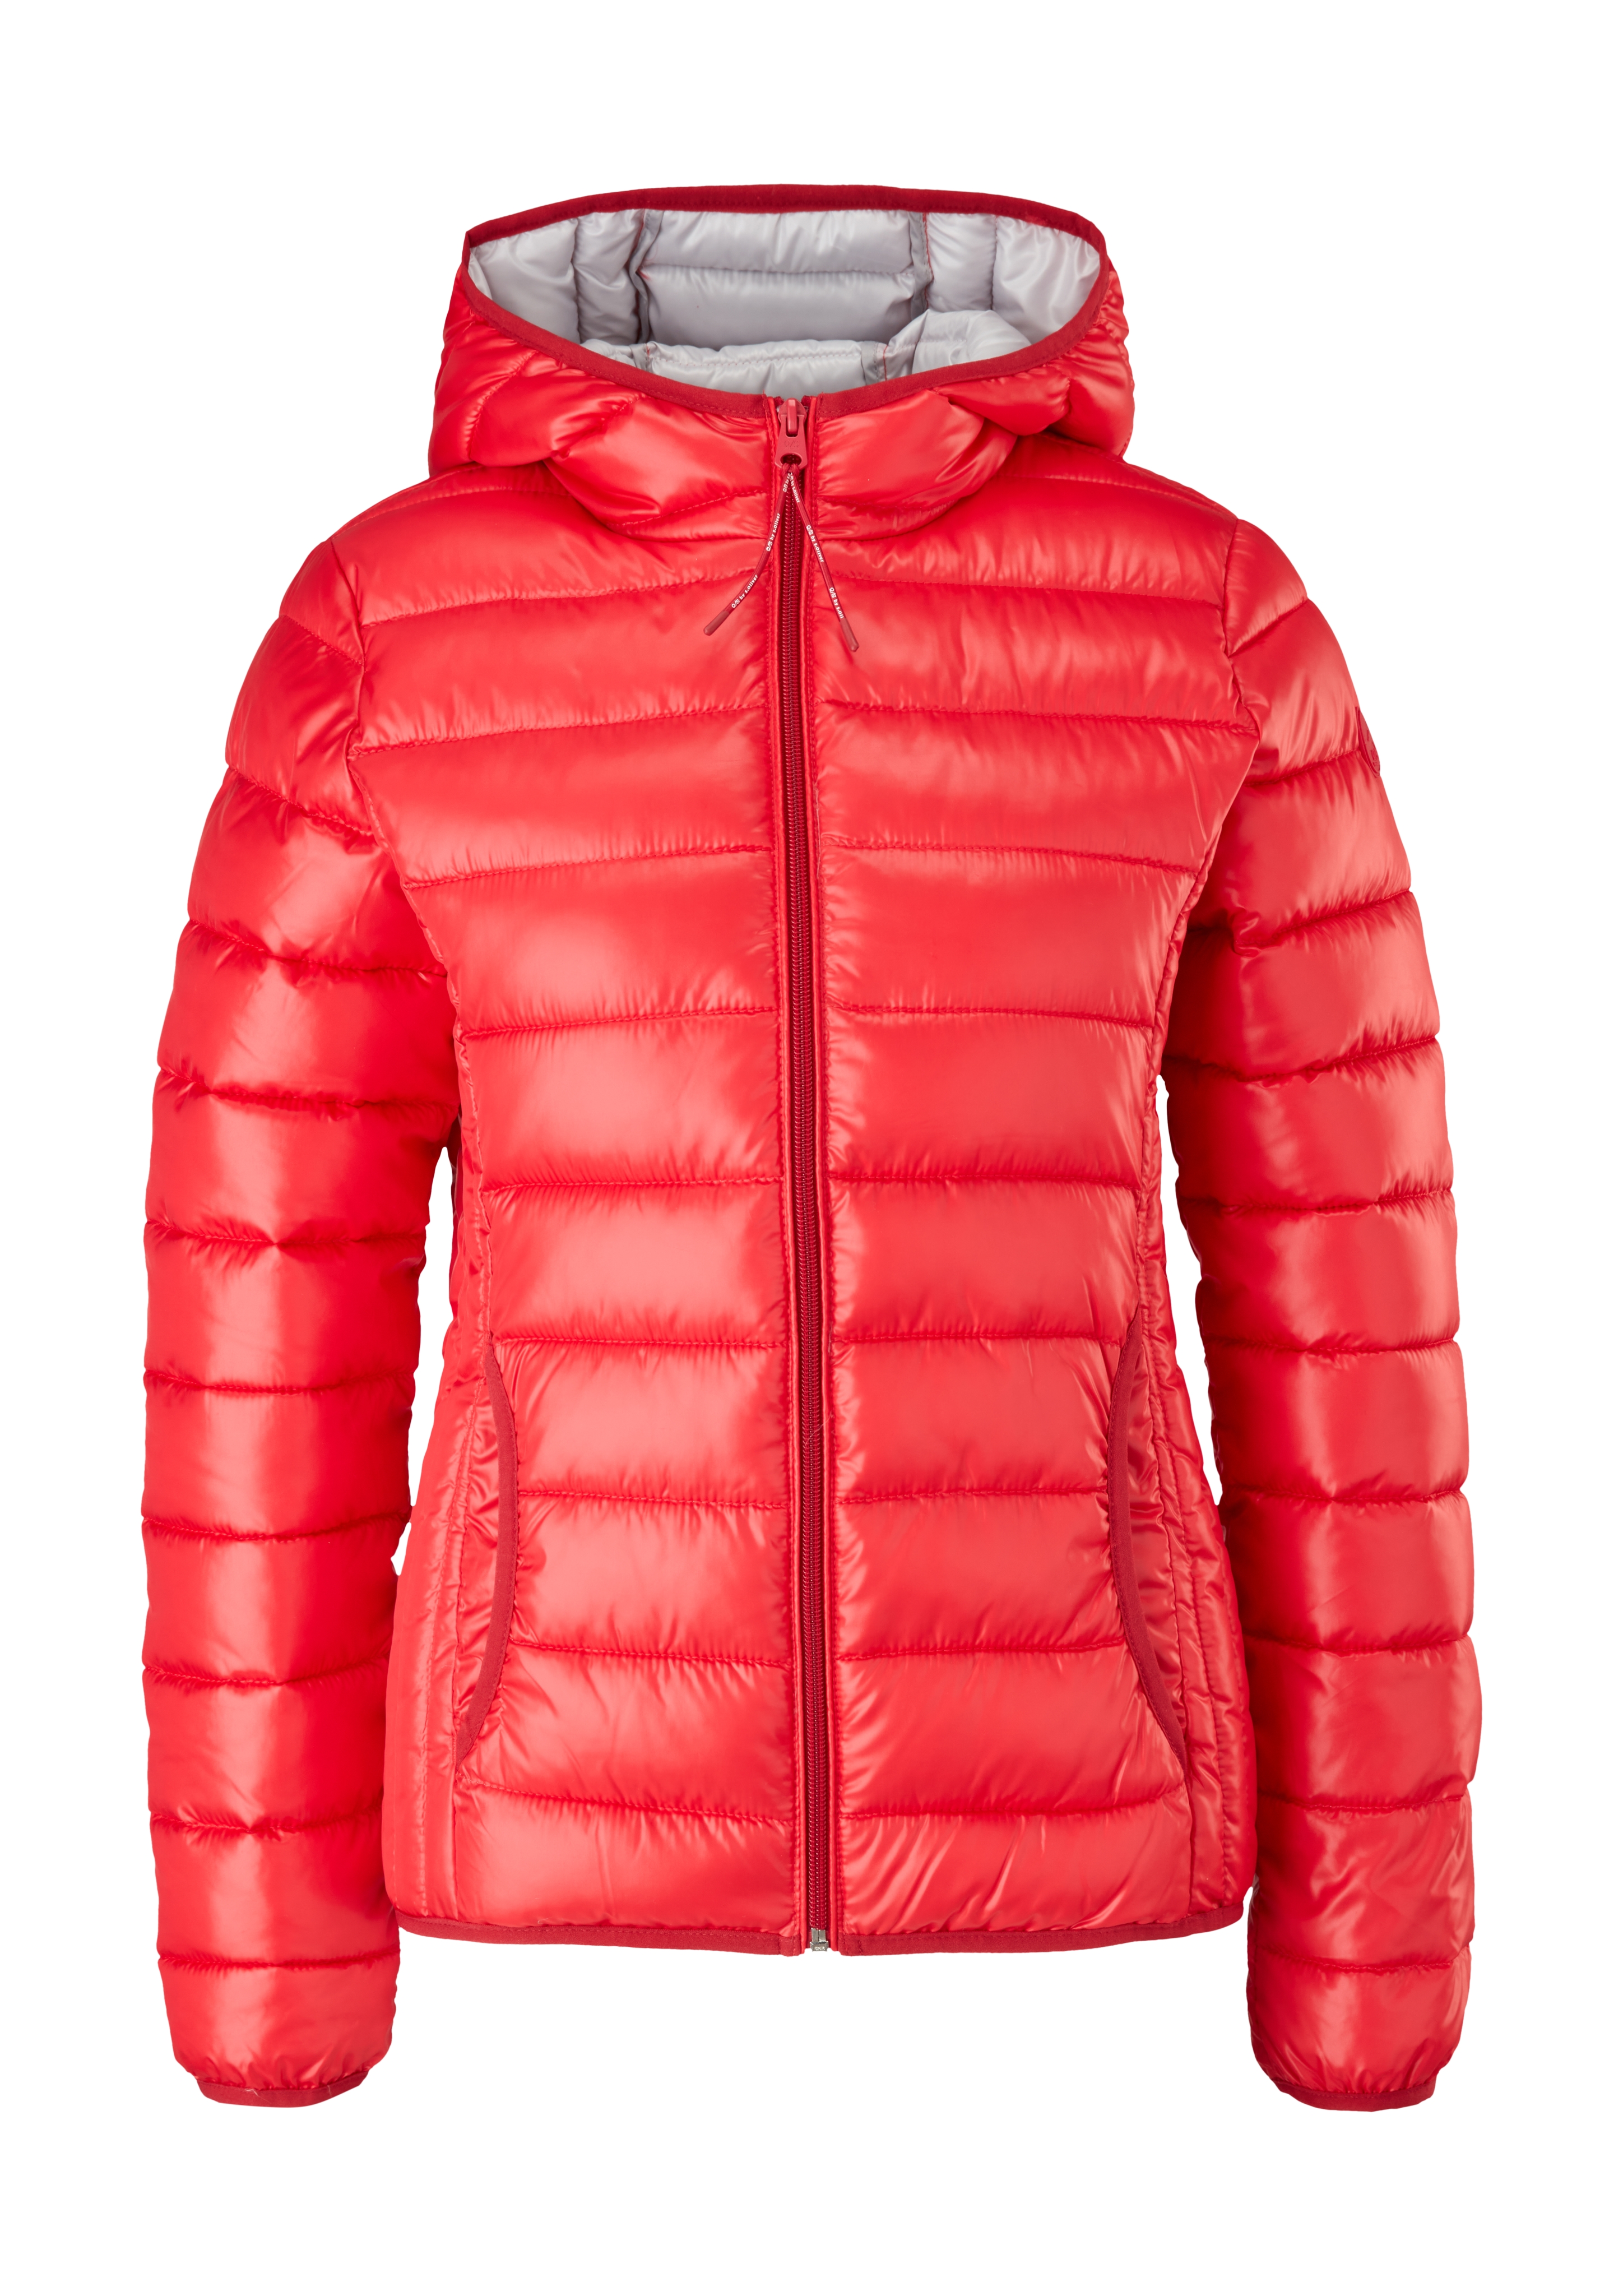 Q/S by s.Oliver Winterjacke in Rot 